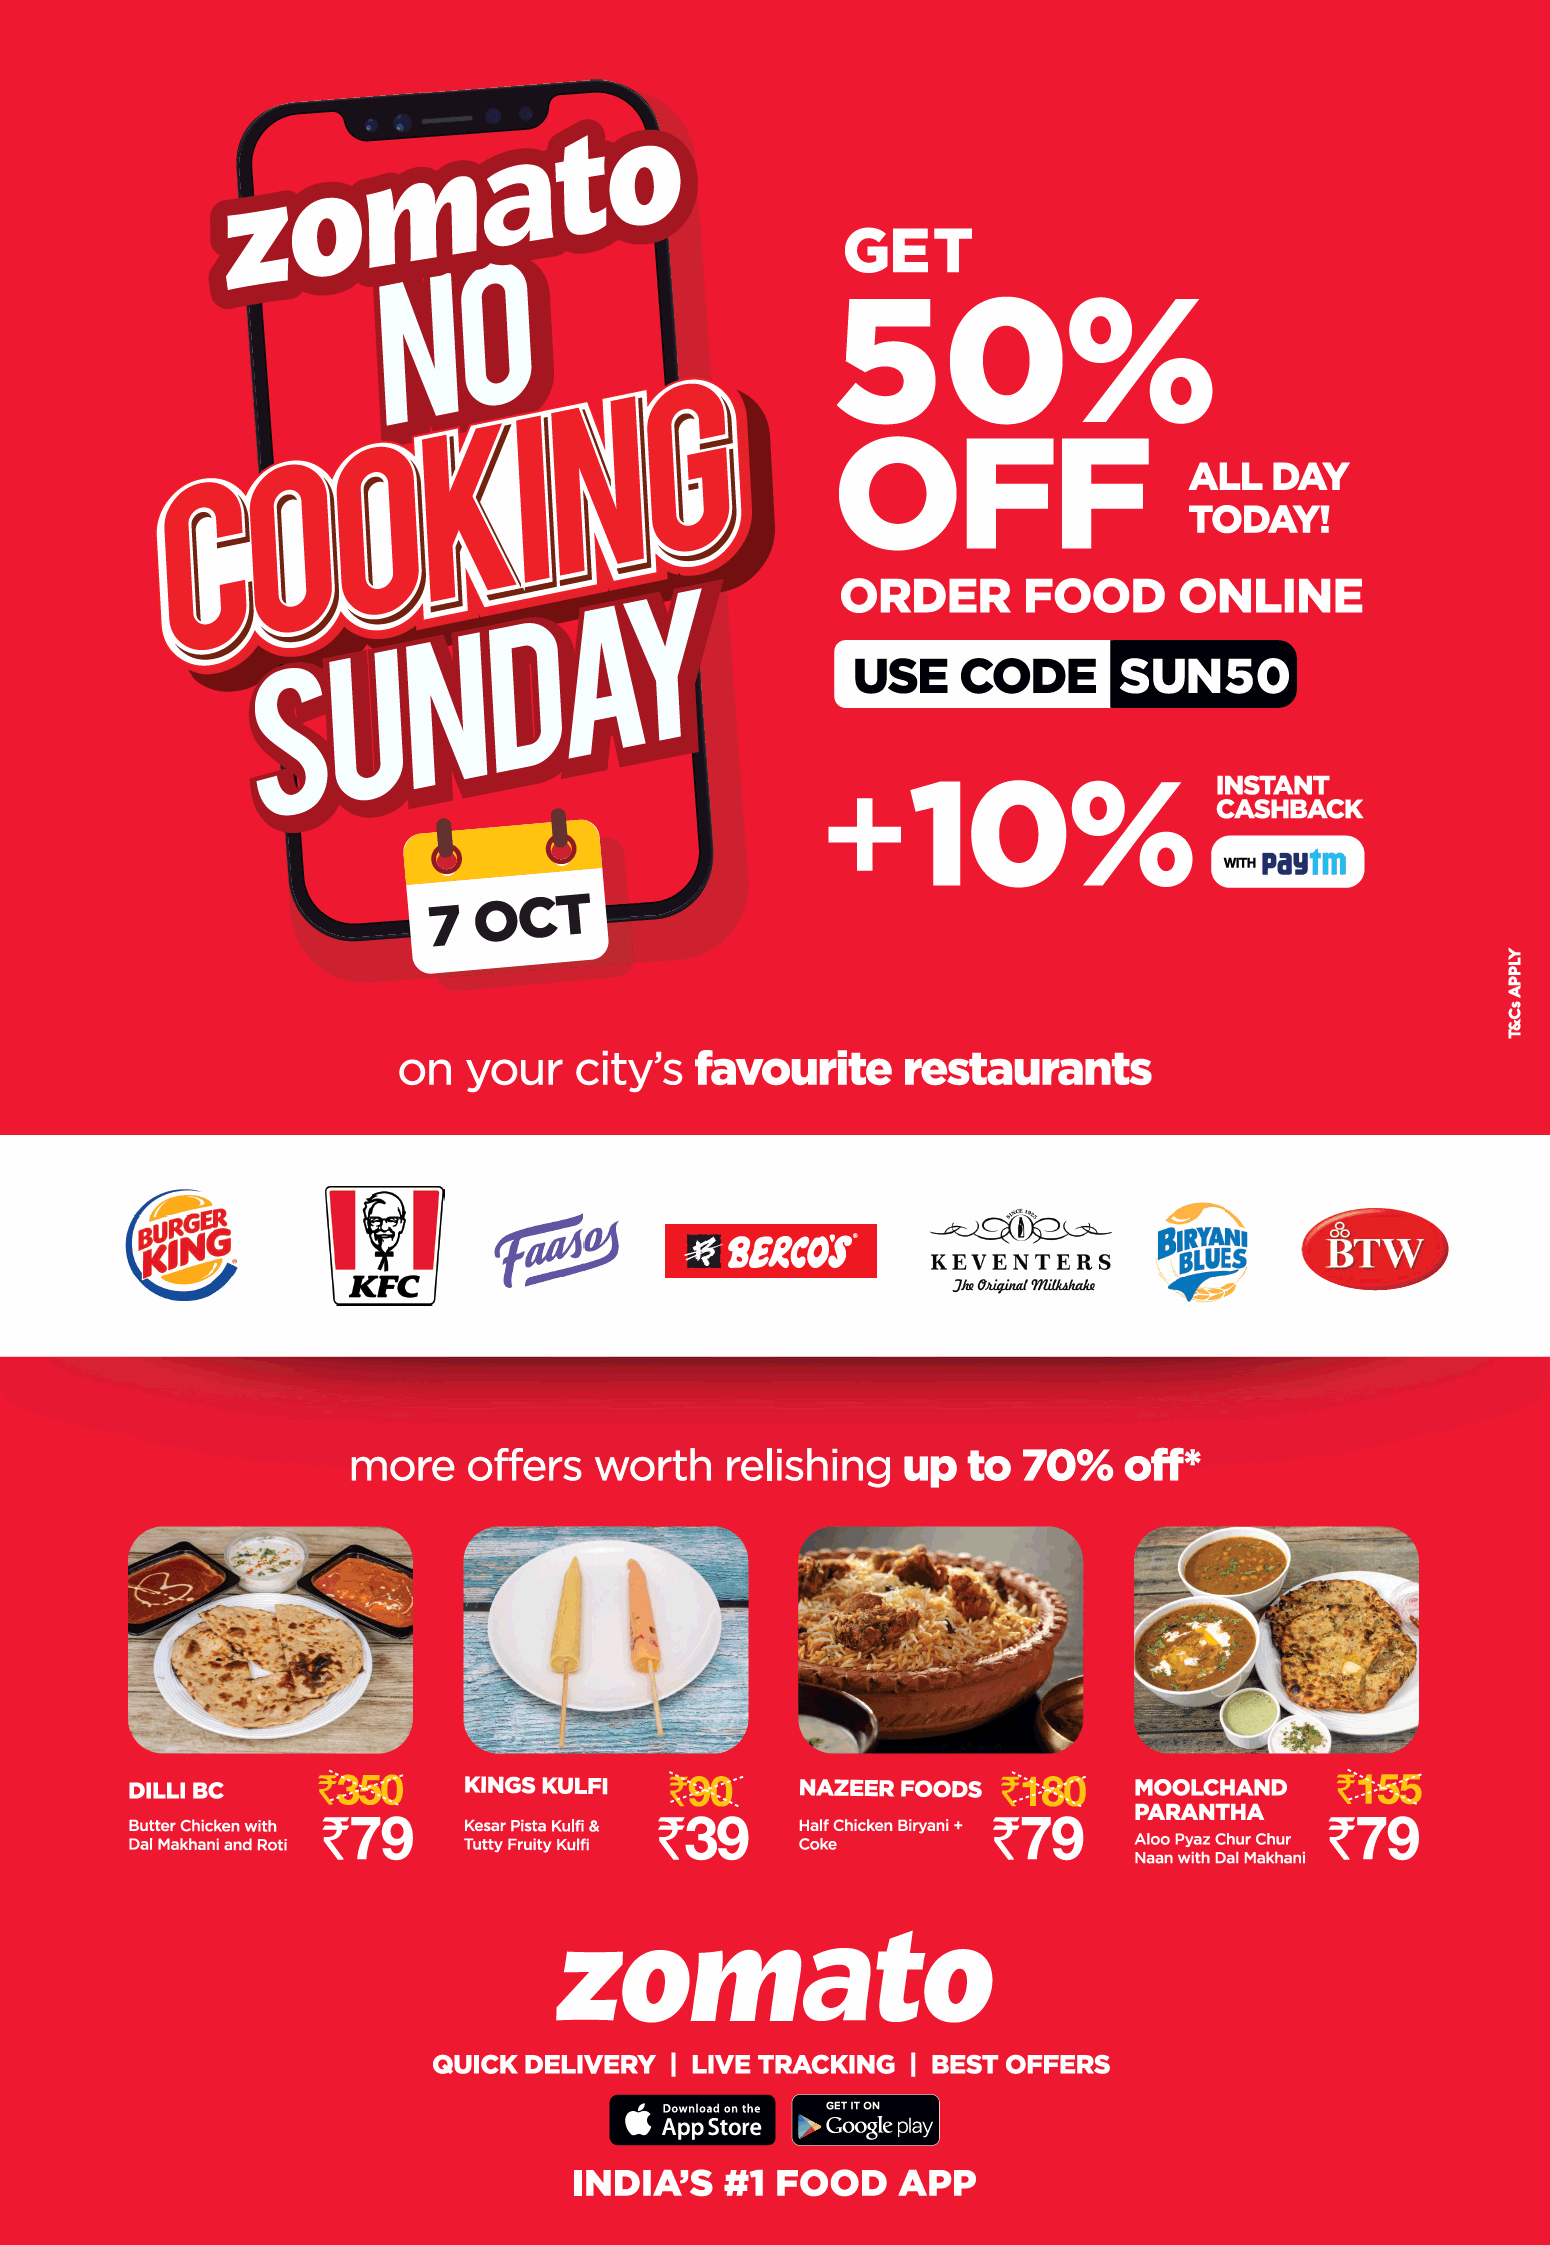 Zomato No Cooking Sunday Get 50% Off Ad - Advert Gallery